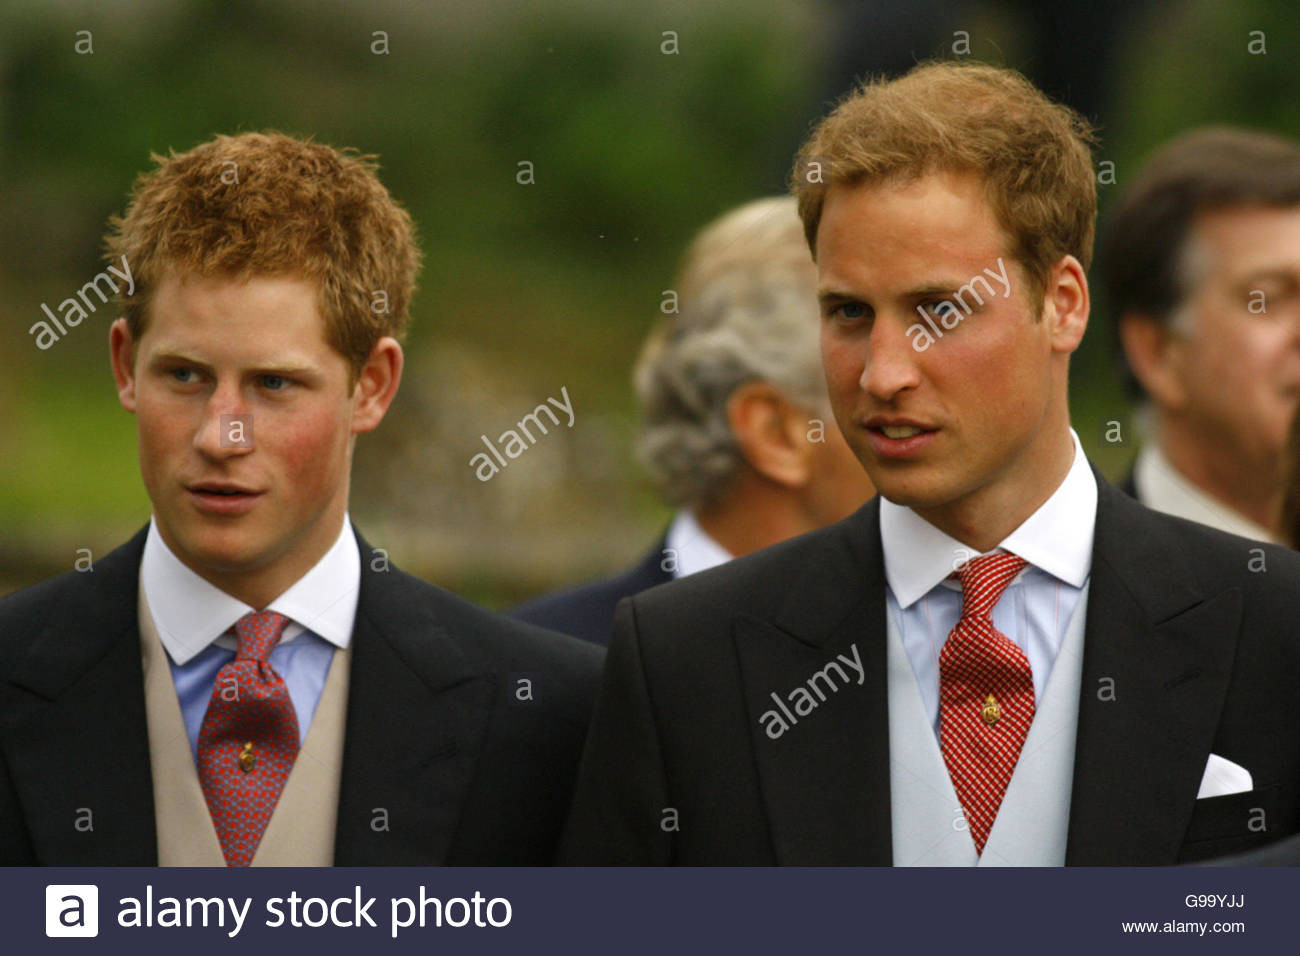 Prinz Harry Hochzeit
 Prince William and Prince Harry at the wedding of Laura